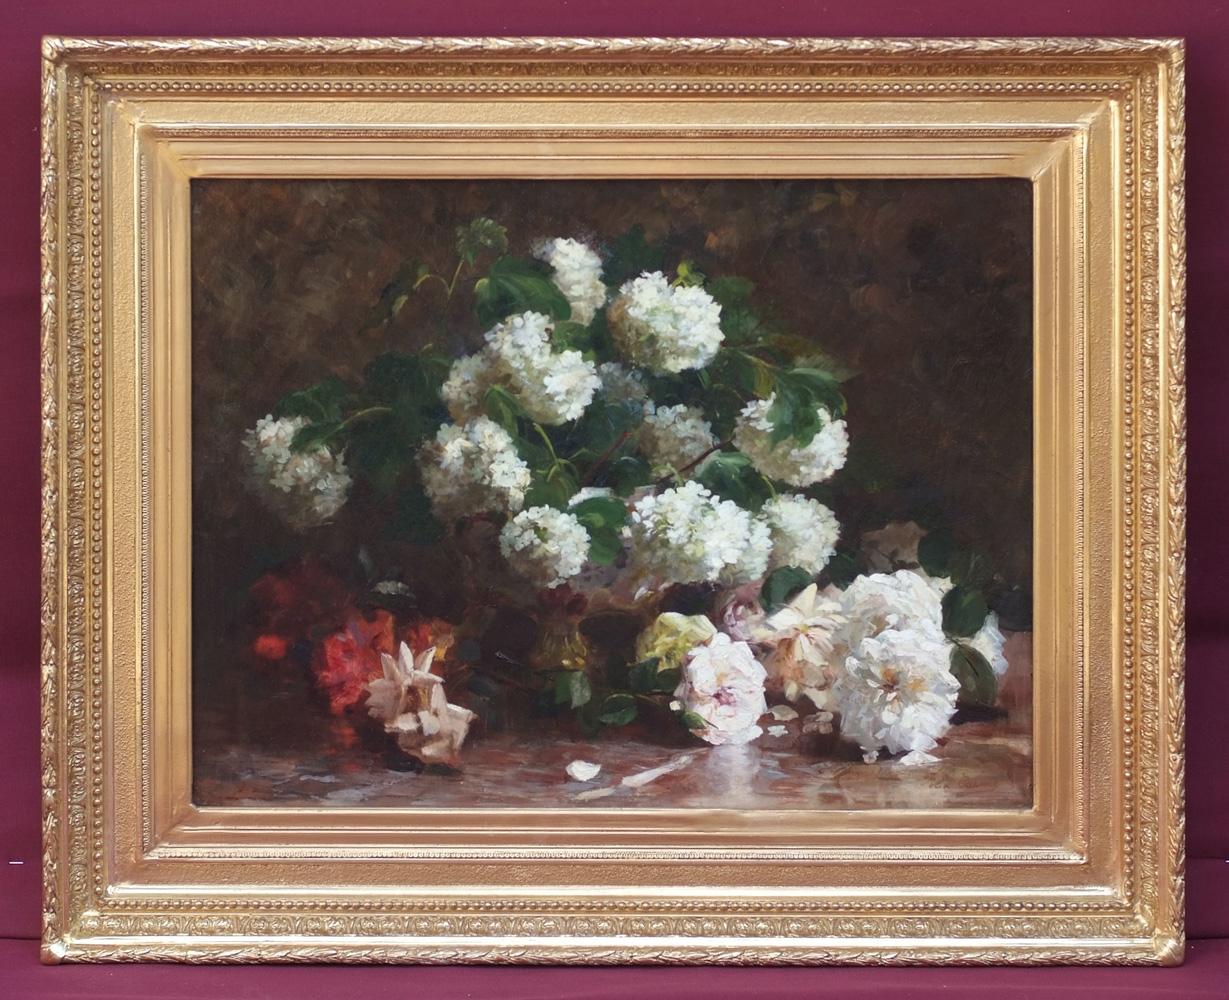 CARME Felix Still-Life Painting - Throw of snowball Flowers and Roses, Painting 19th century